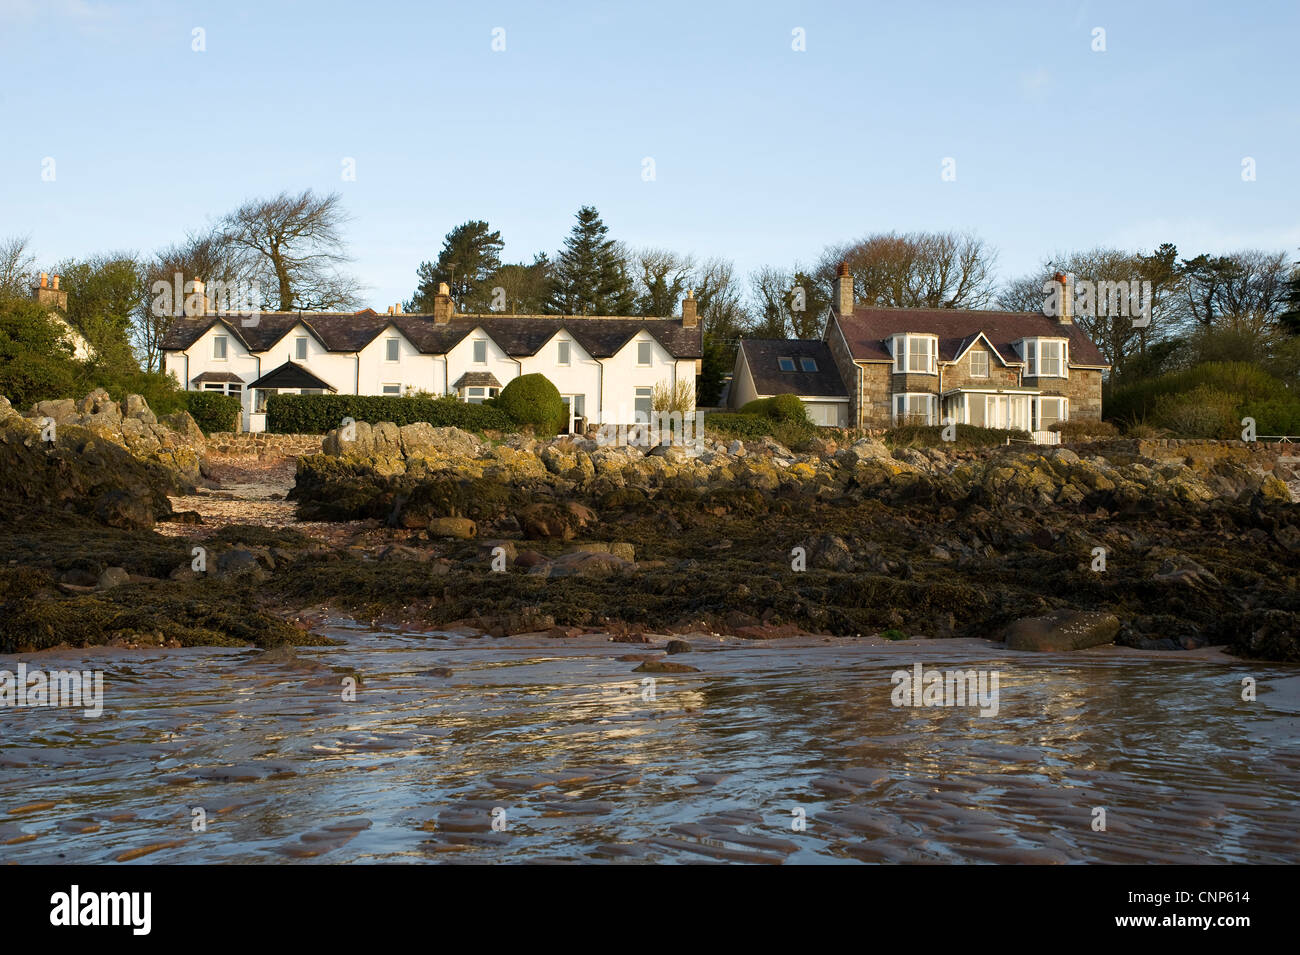 Rockcliffe, Dumfries and Galloway, Scotland Stock Photo